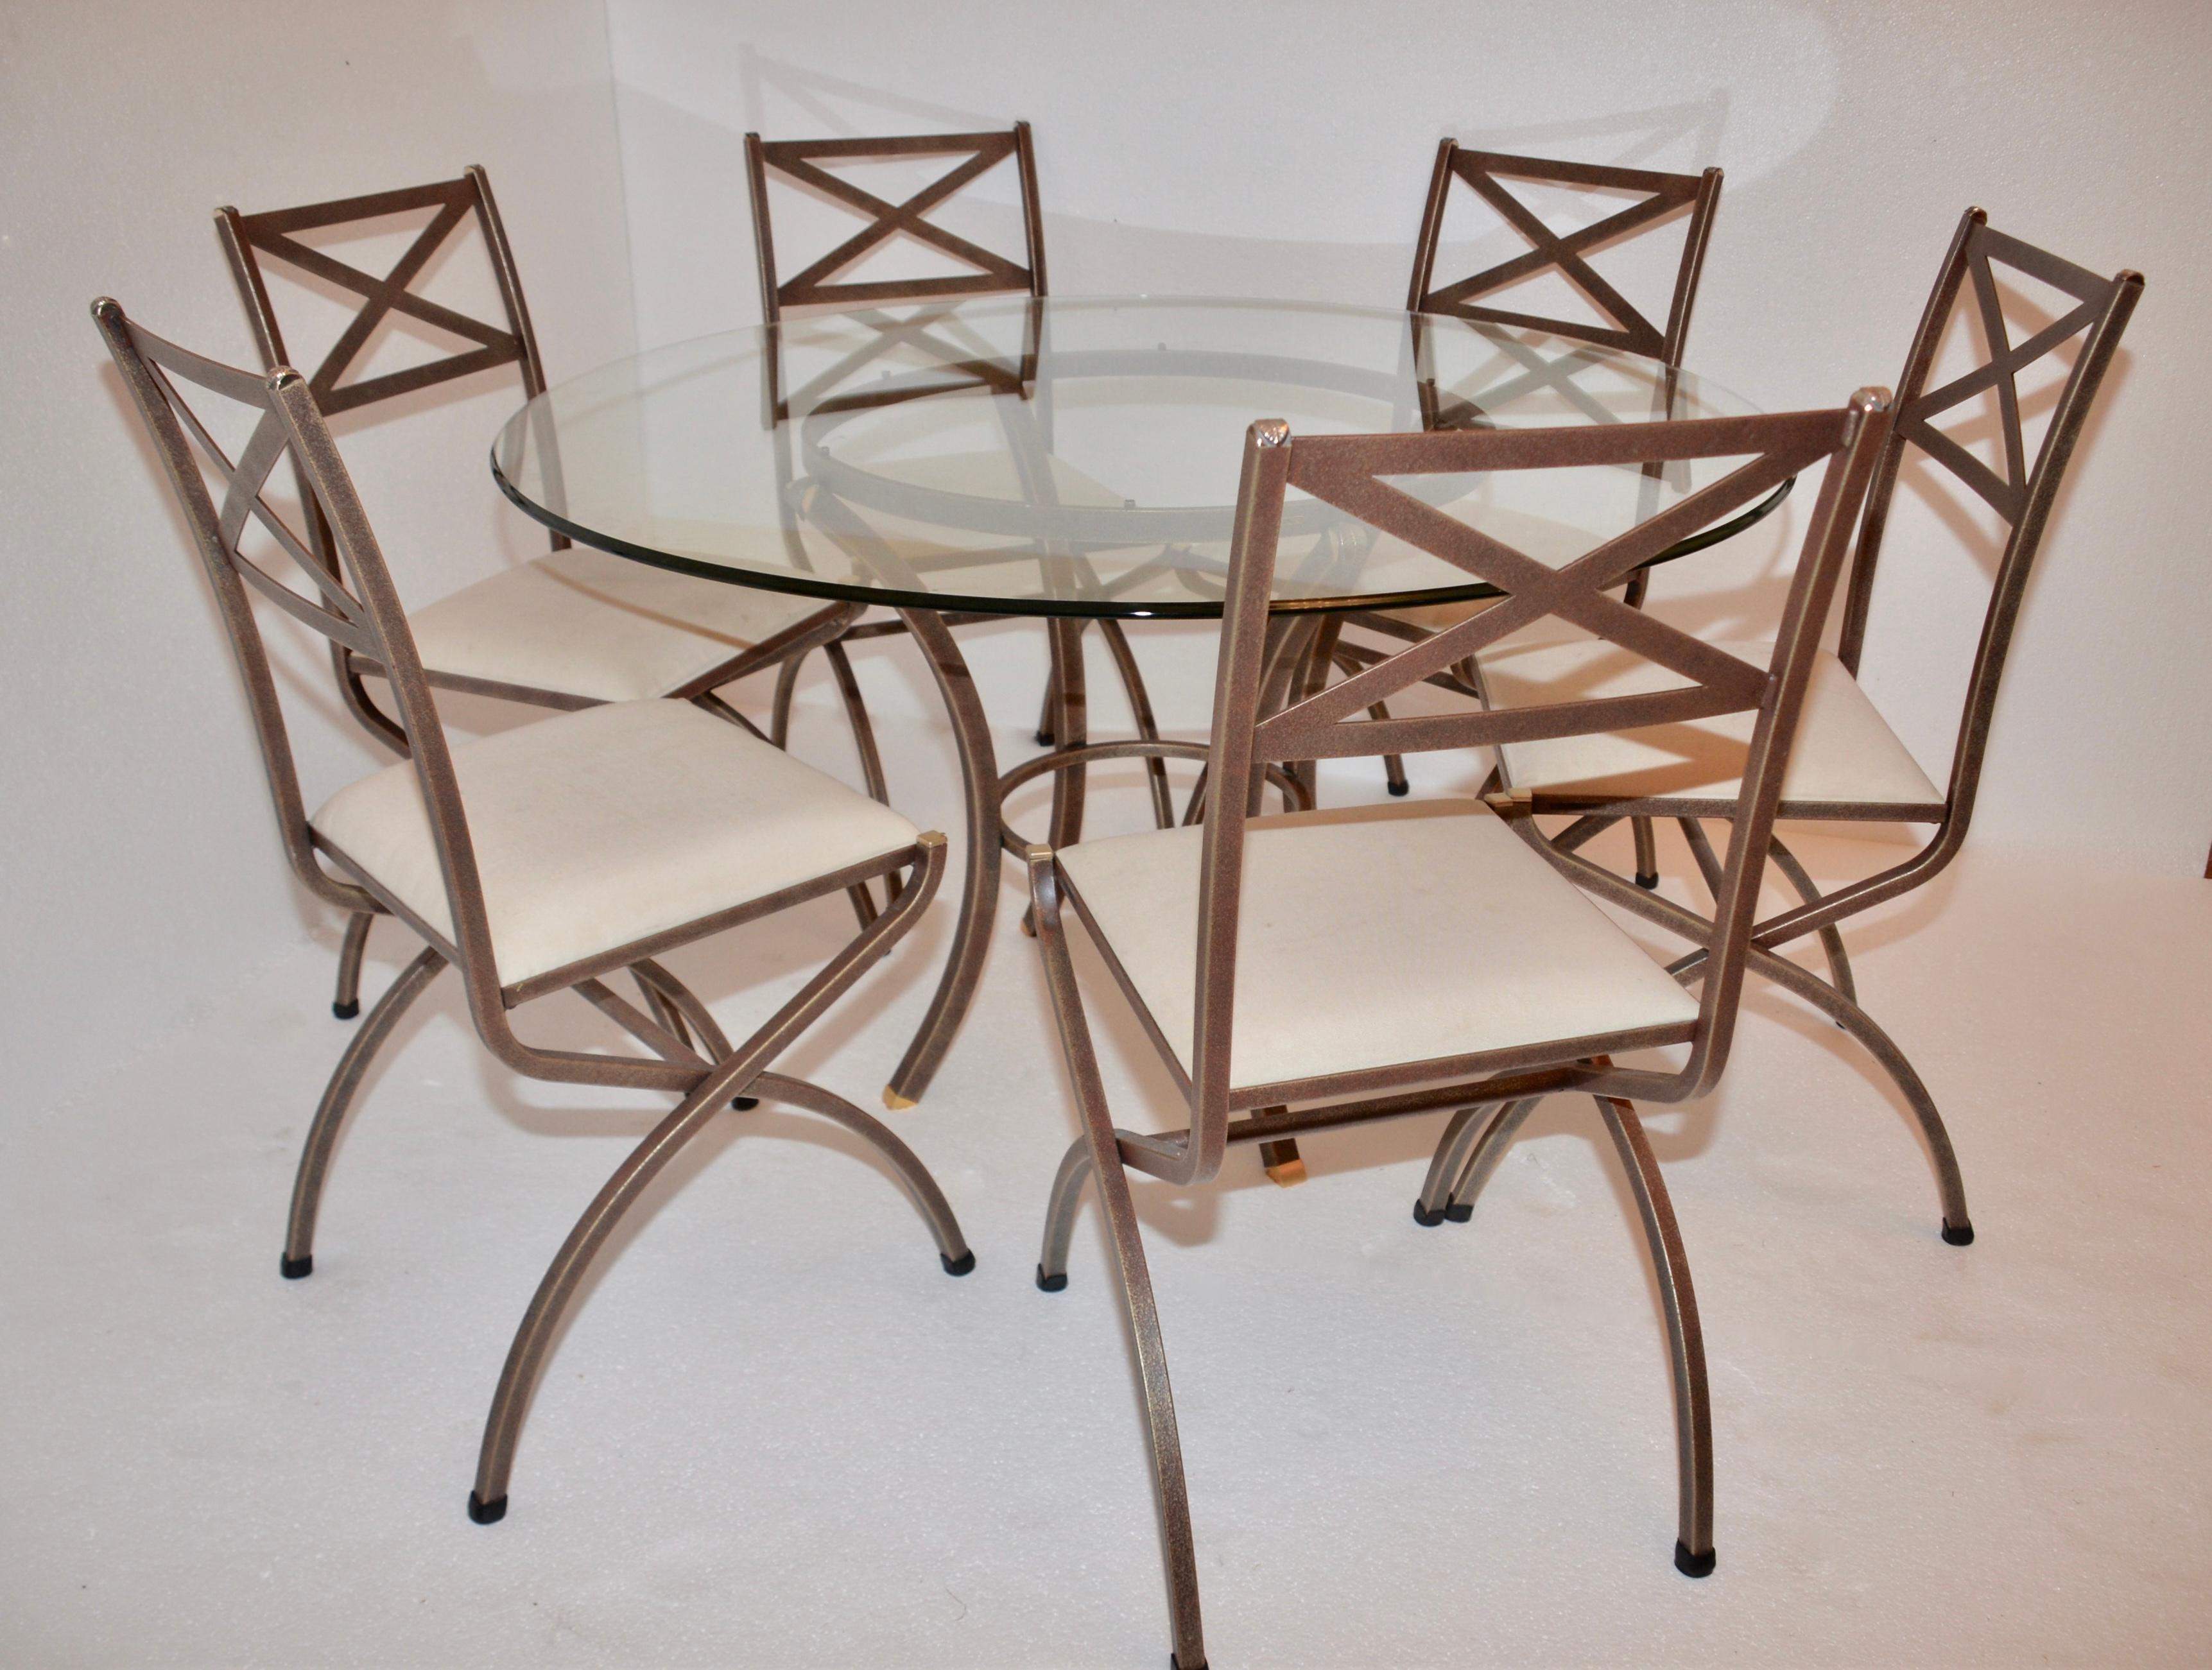 A genuine dining table and six chairs by the iconic French designer Pierre Vandel. This table has a beveled glass top the frame is brown with gold flecks. There are pretty brass leaf designs on the corner castings and on the top of each corner of